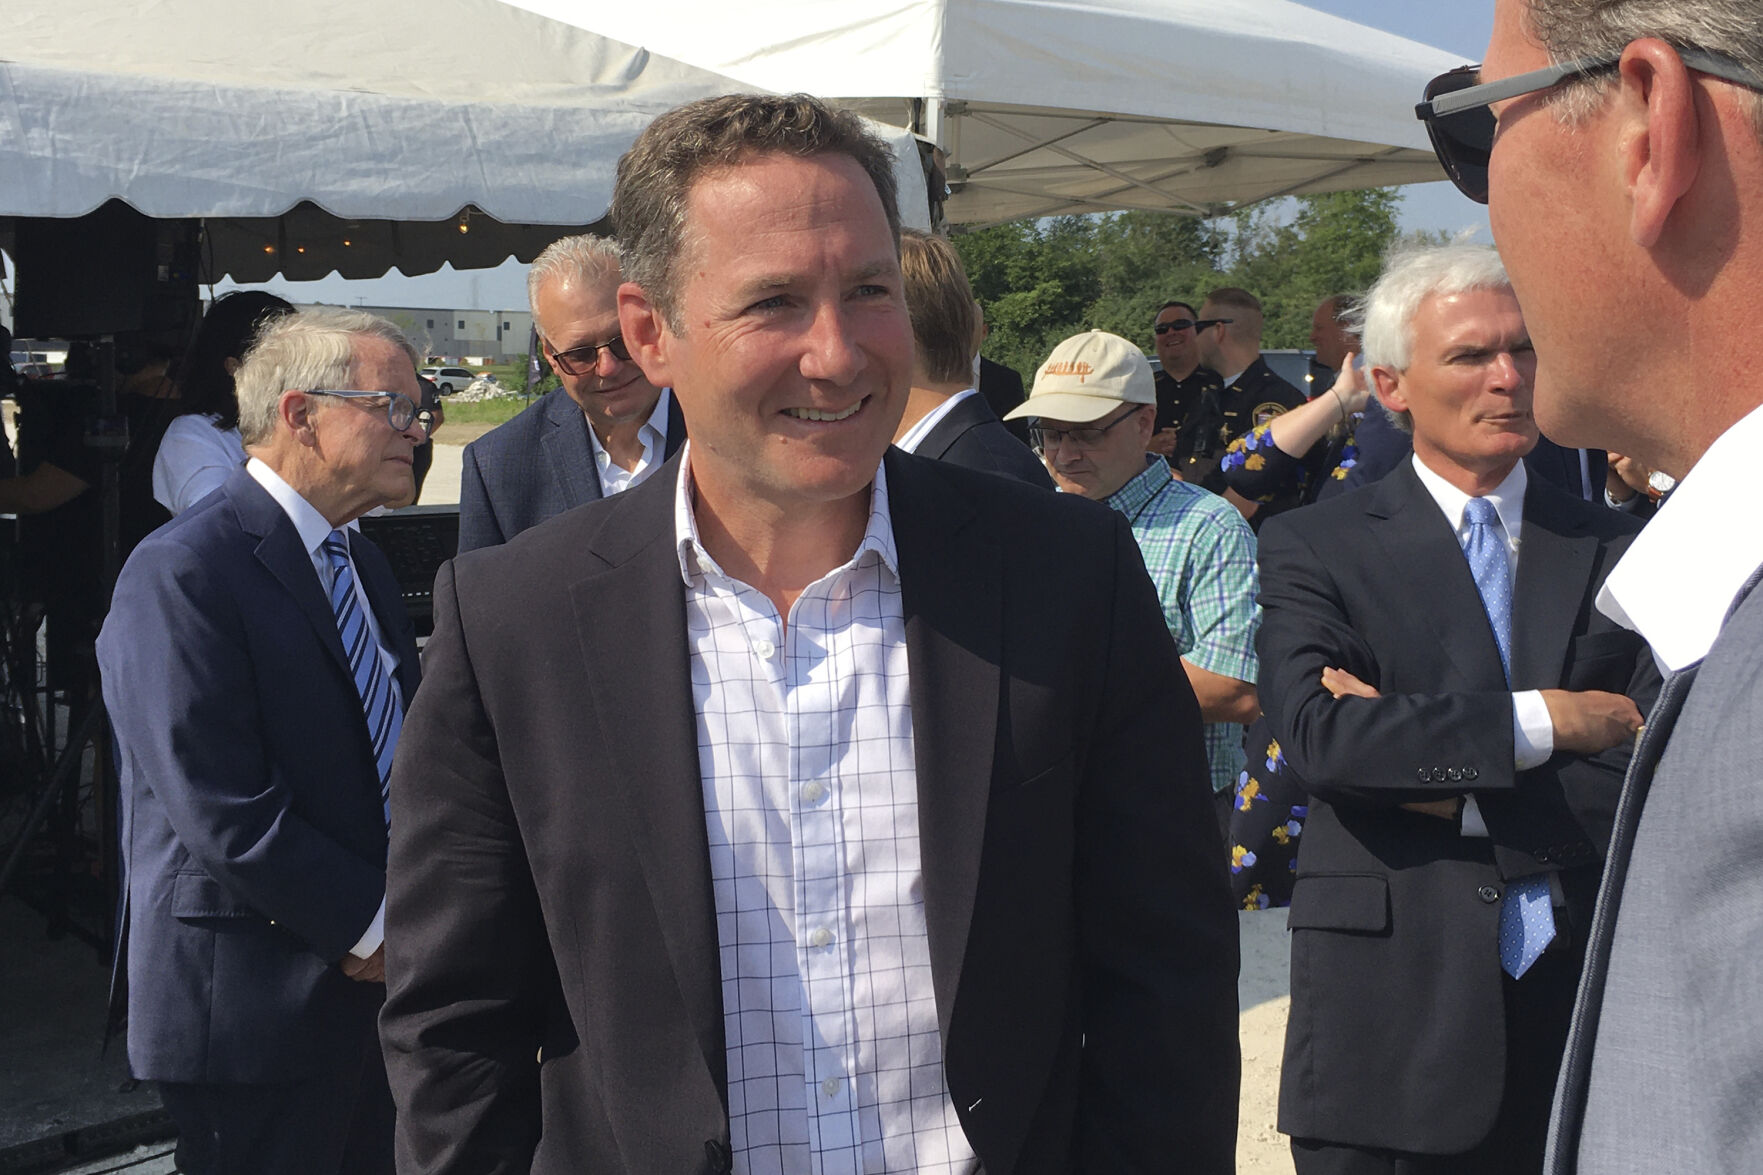 Peloton CEO John Foley speaks with Ohio Lt. Gov. Jon Husted before the groundbreaking for the company